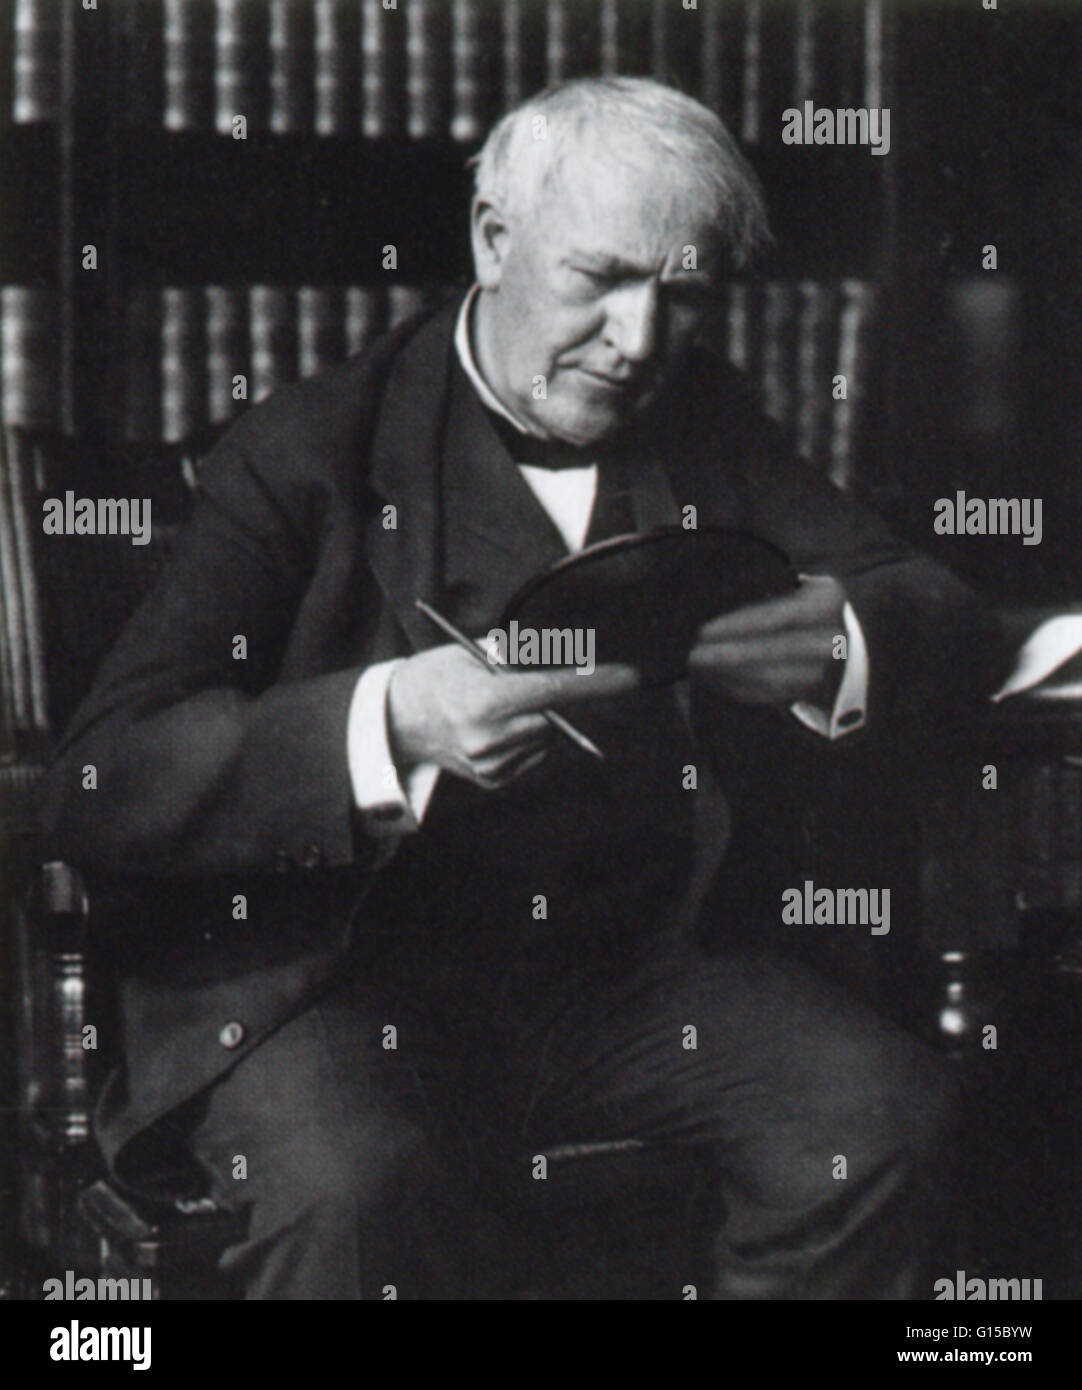 Thomas Alva Edison (1847-1931) was an American inventor and businessman. He developed many devices that greatly influenced life around the world, including the phonograph, the motion picture camera, and a long-lasting, practical electric light bulb. Dubbe Stock Photo